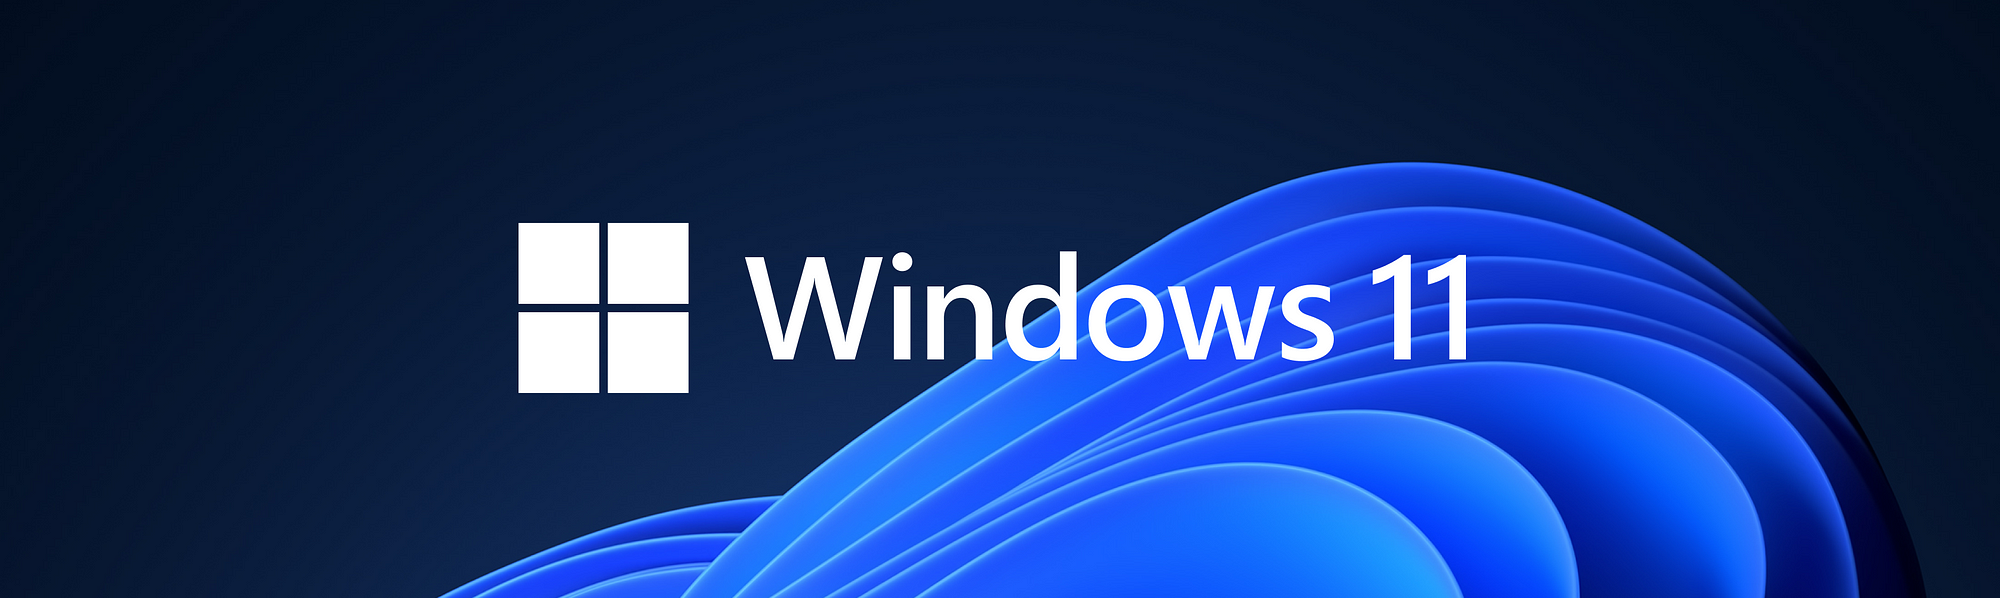 Windows 11: Designing the Next Generation, by Microsoft Design, Microsoft  Design